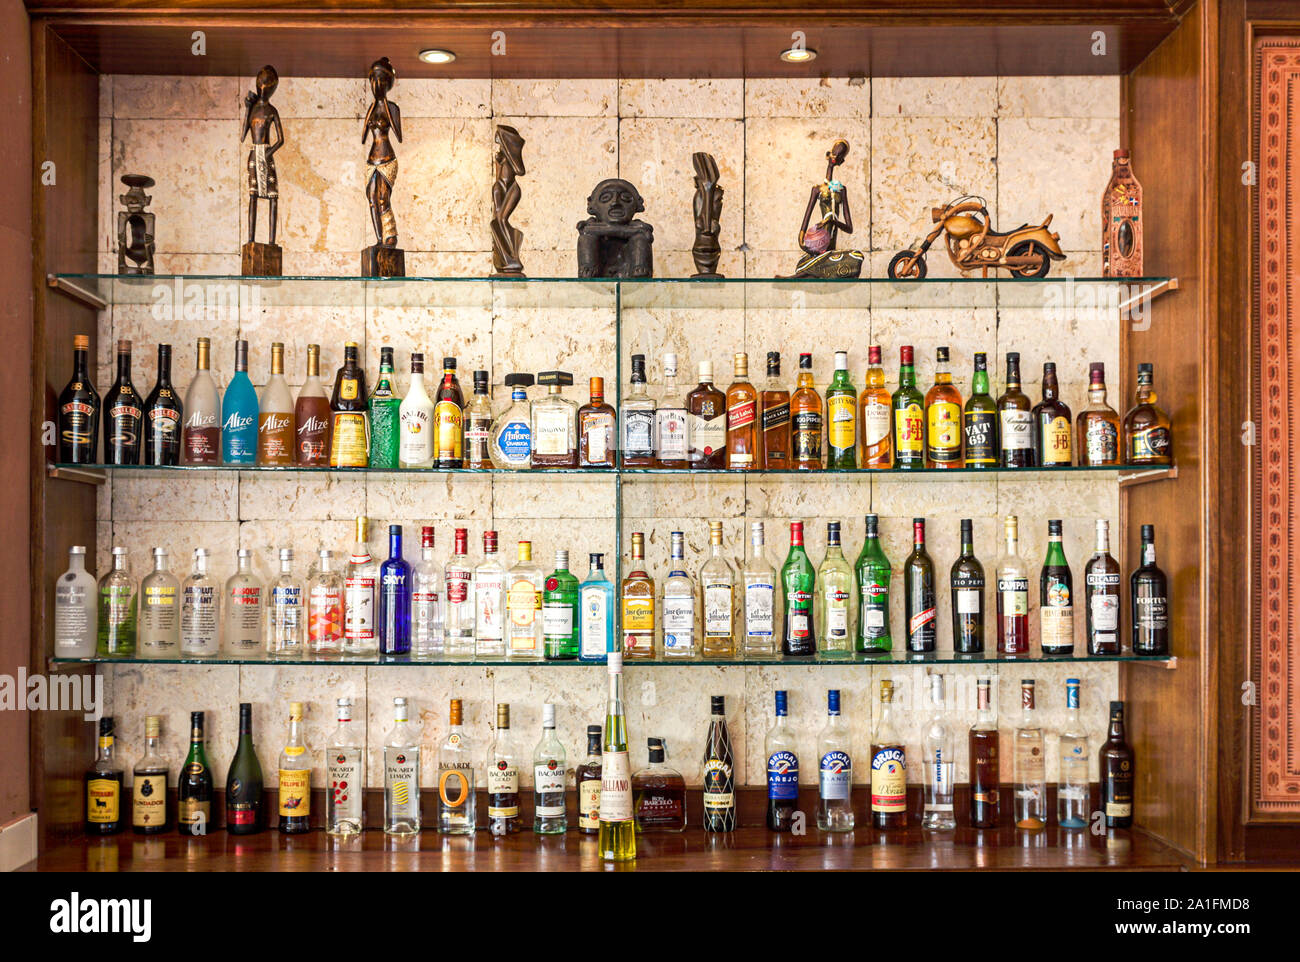 Punta Cana, Dominican Republic - June 11, 2014: A Cocktails Bar with an Assortment of Alcoholic Drinks. Stock Photo